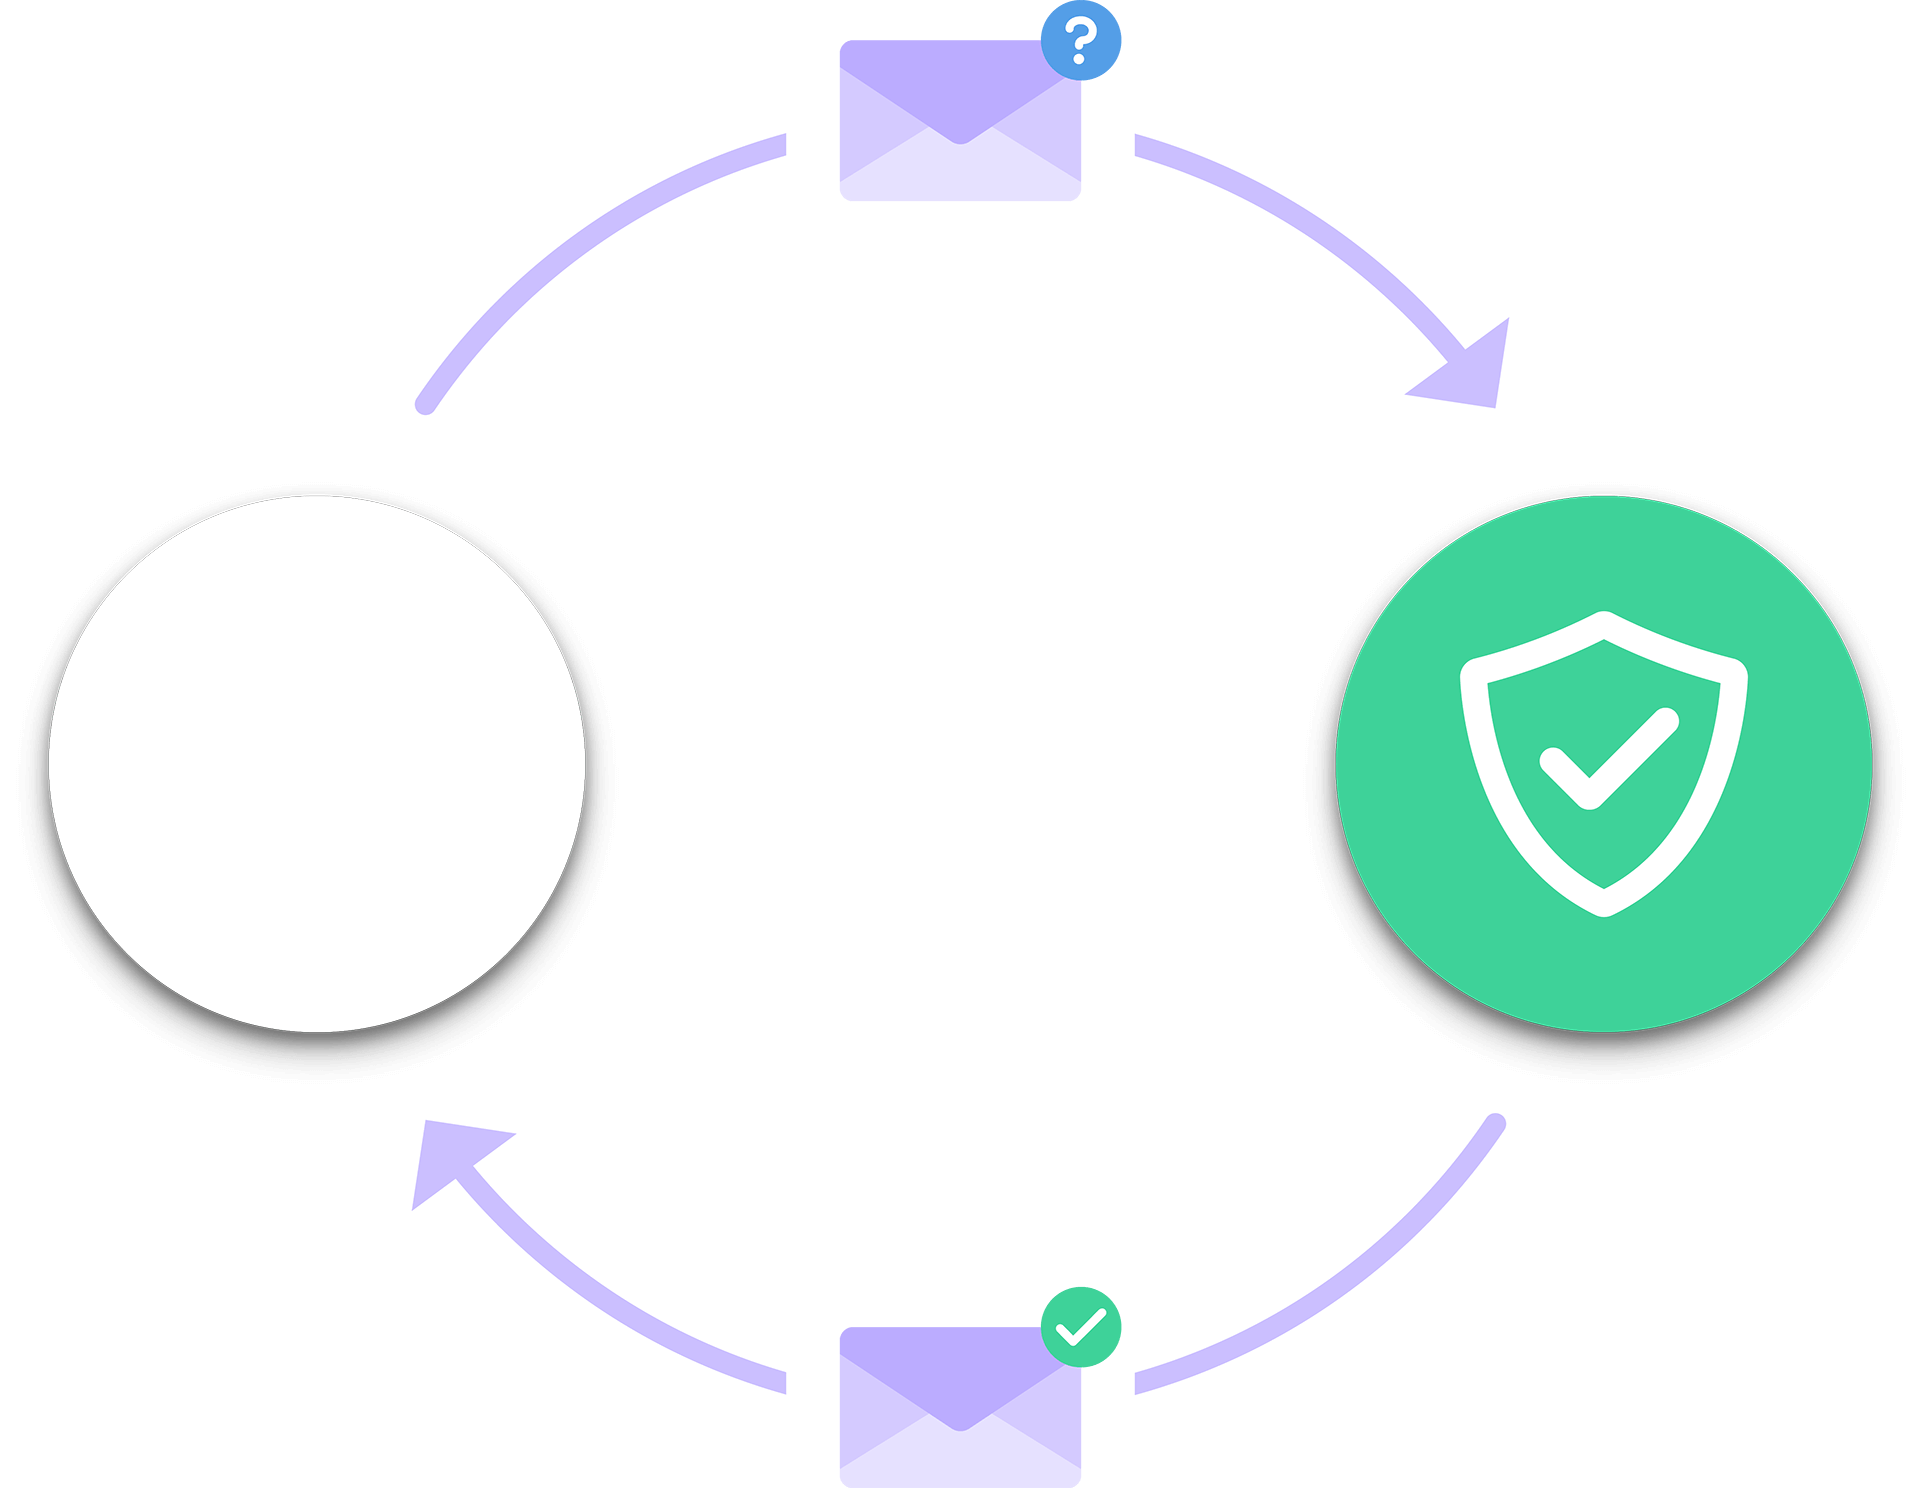 Diagram showing an email being automatically imported into Monitor, verified, and exported back to an integration